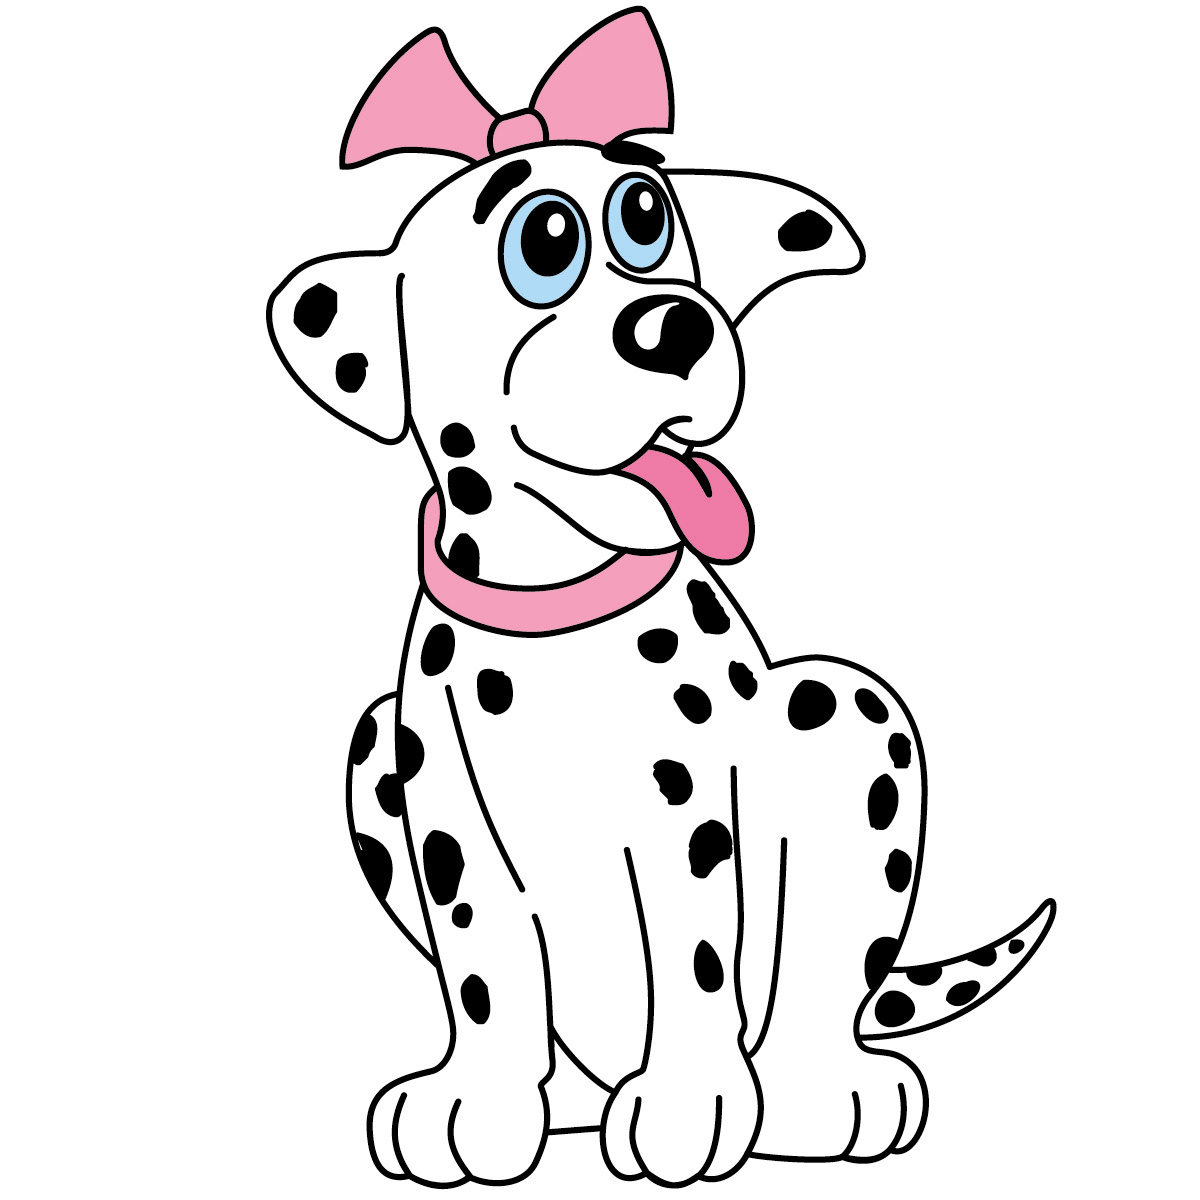 Clip Arts Related To : dalmatians birthday party. 